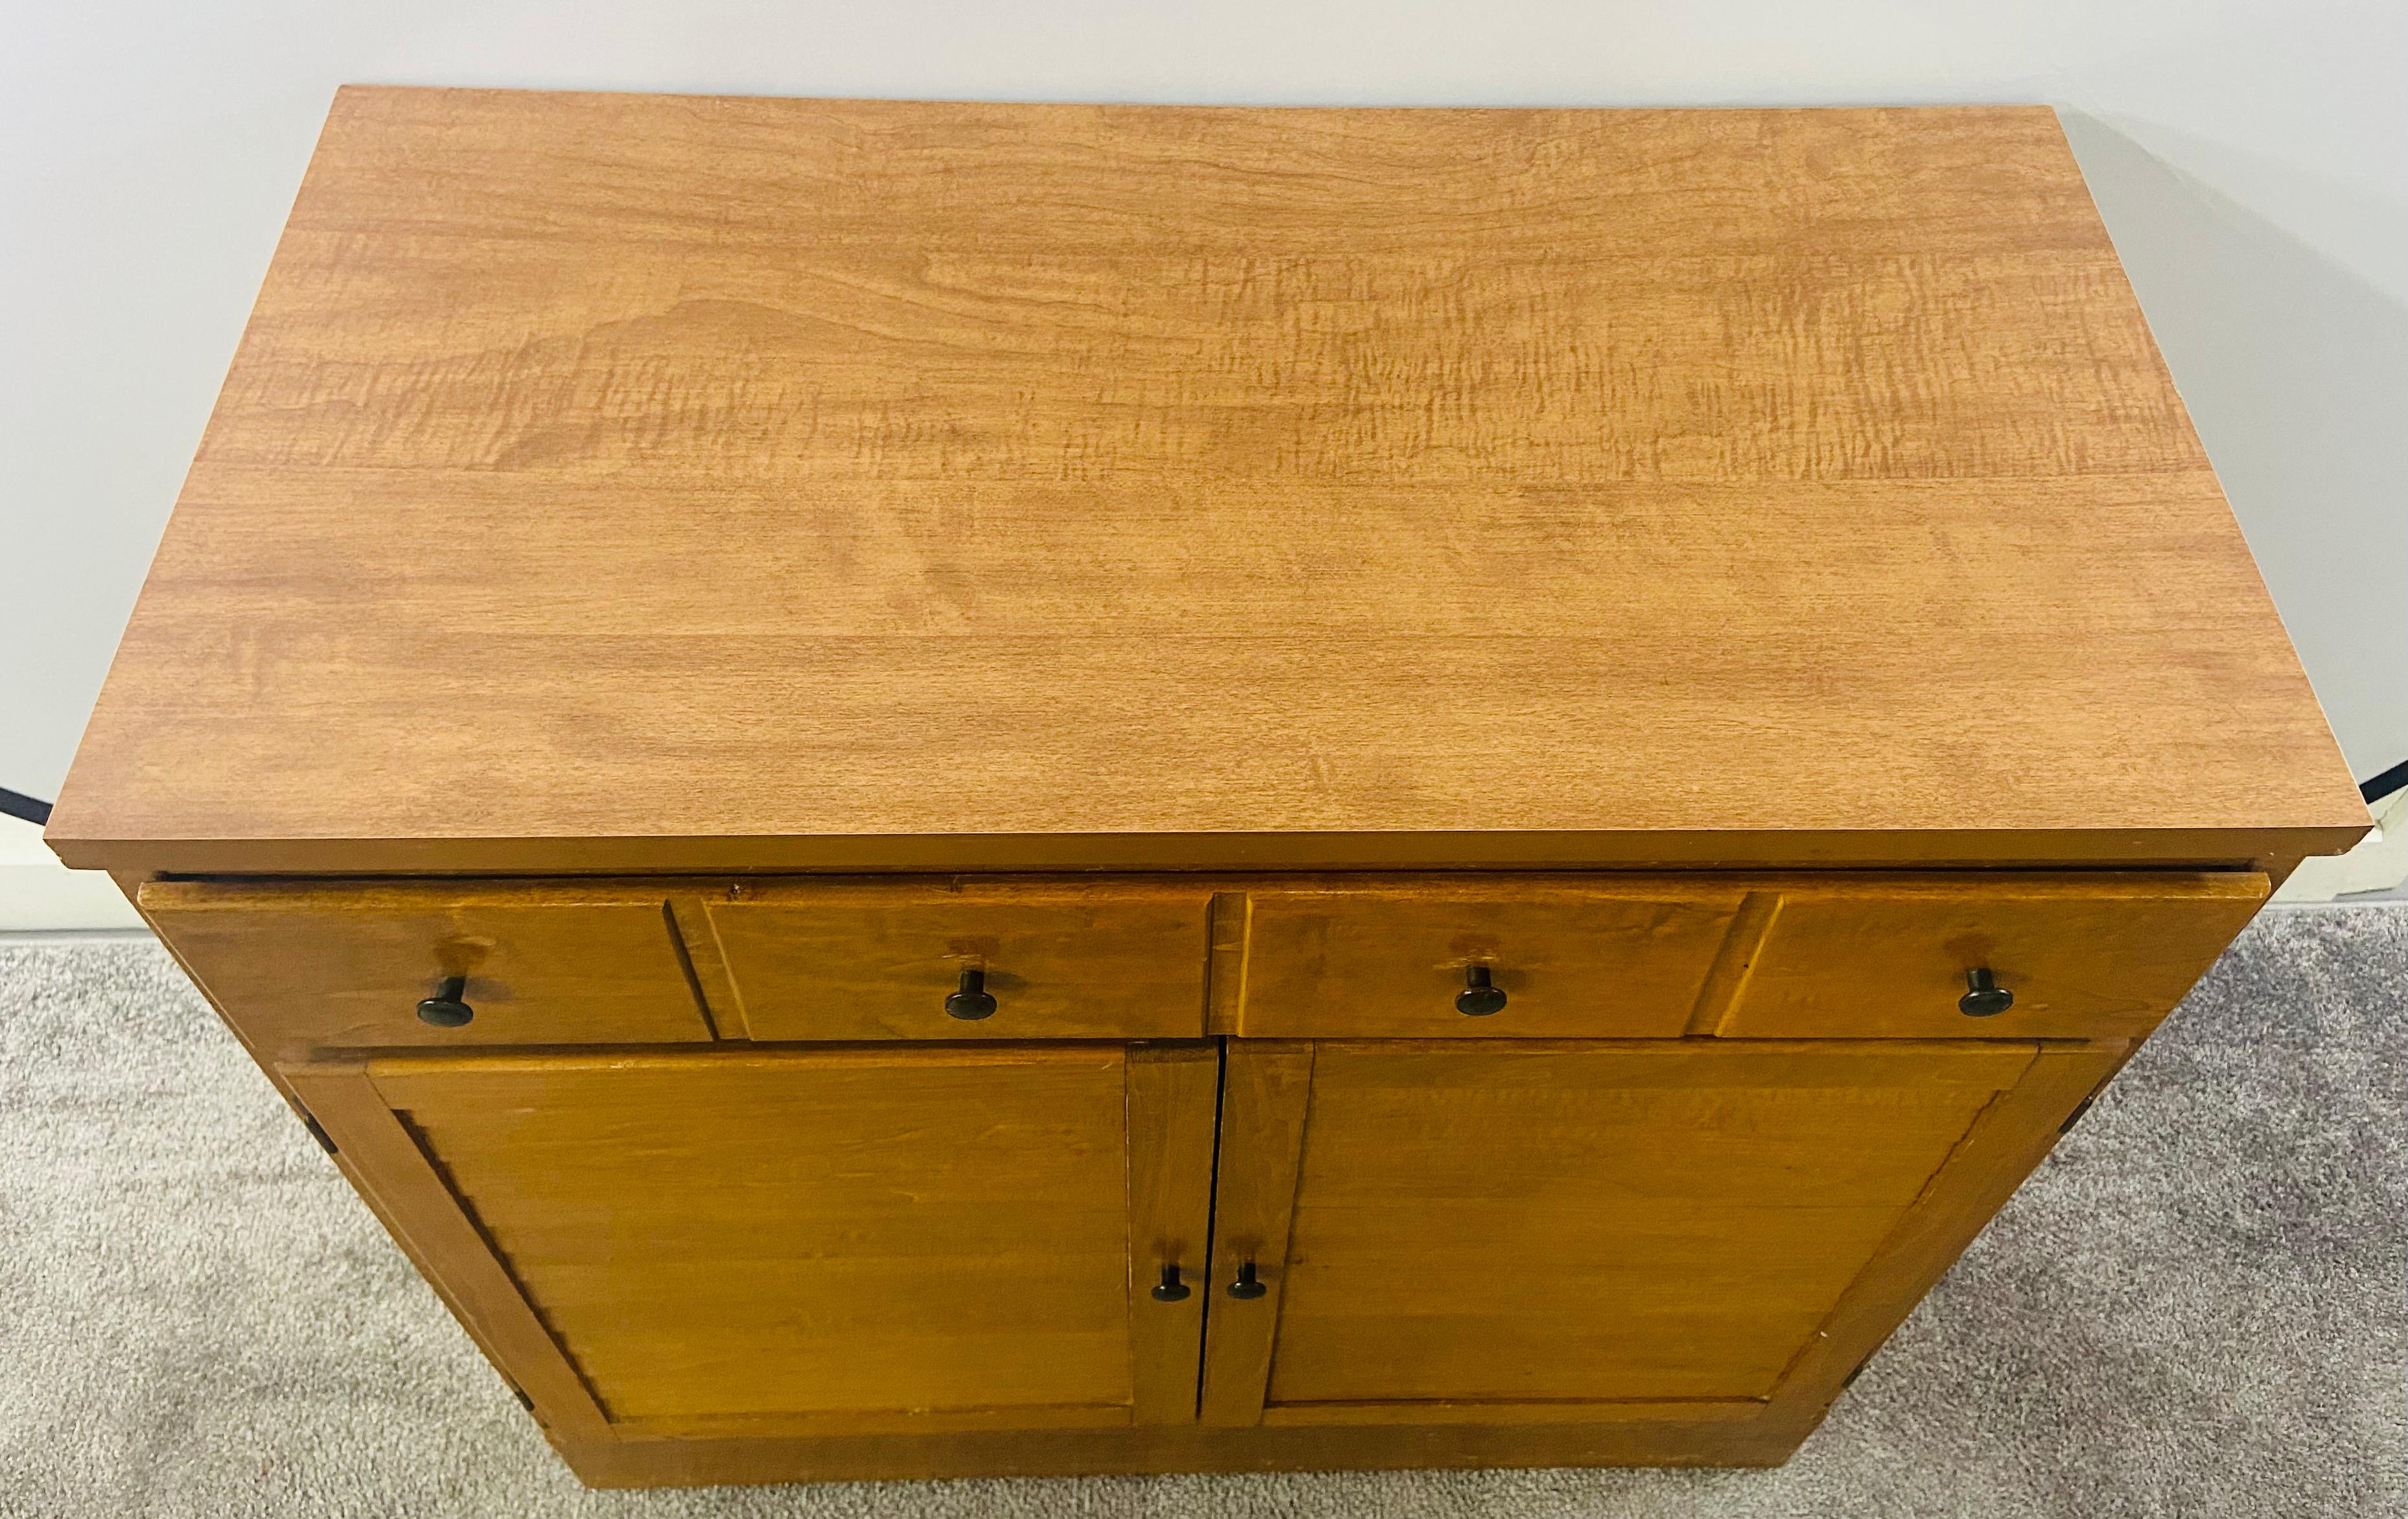 American Mid-Century Modern Maple Wood Two-Door Chest, Nightstand or Cabinet